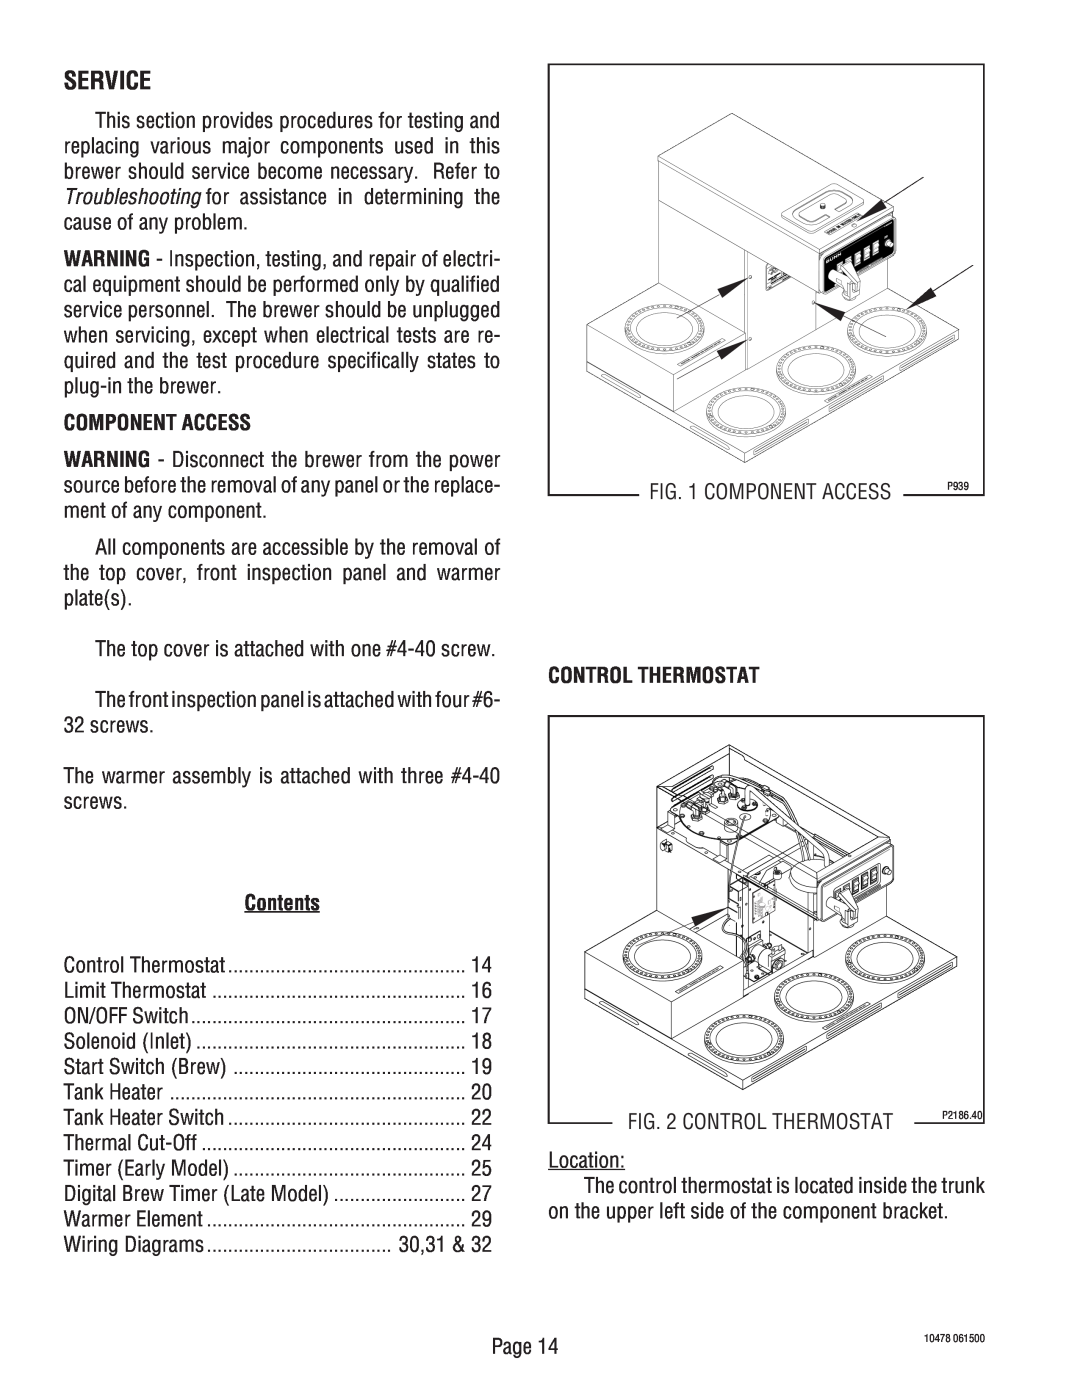 Bunn CRTF5, CRT5 service manual Service, Component Access, Contents, Control Thermostat 